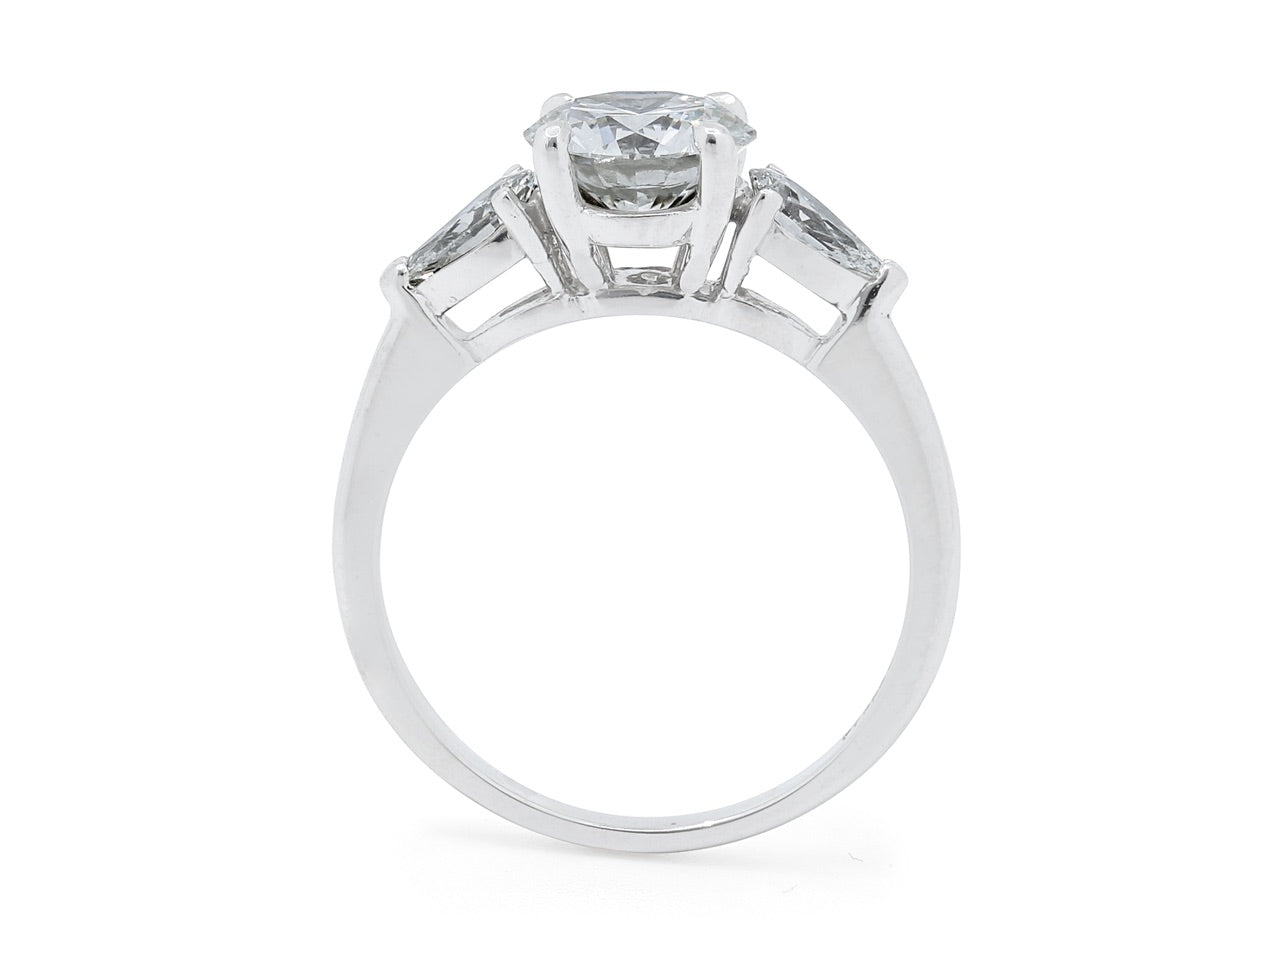 Diamond Solitaire Ring, 1.42 carat H/SI-1 with Pear-shape Diamond Shoulders, in Platinum